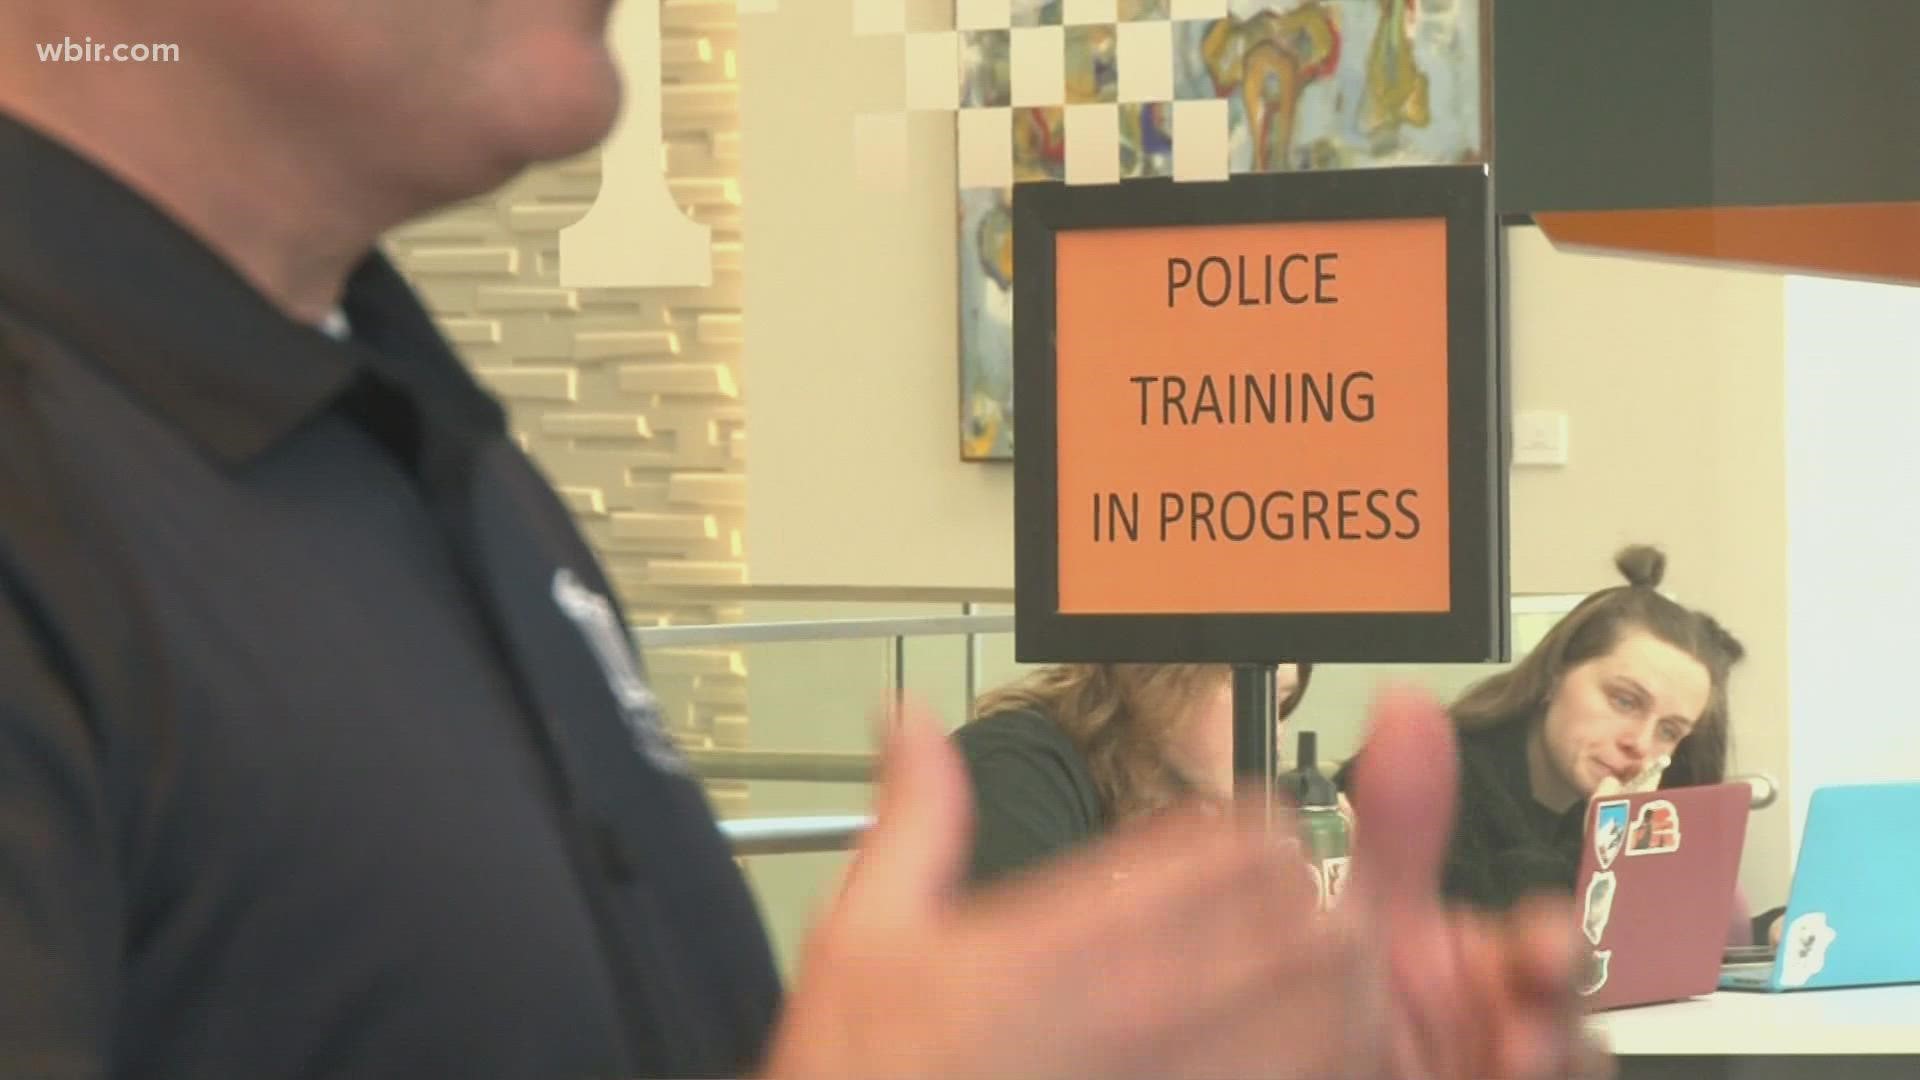 The University of Tennessee Police Department co-hosted a national training program that shows police how to defuse incidents involving people in crisis.